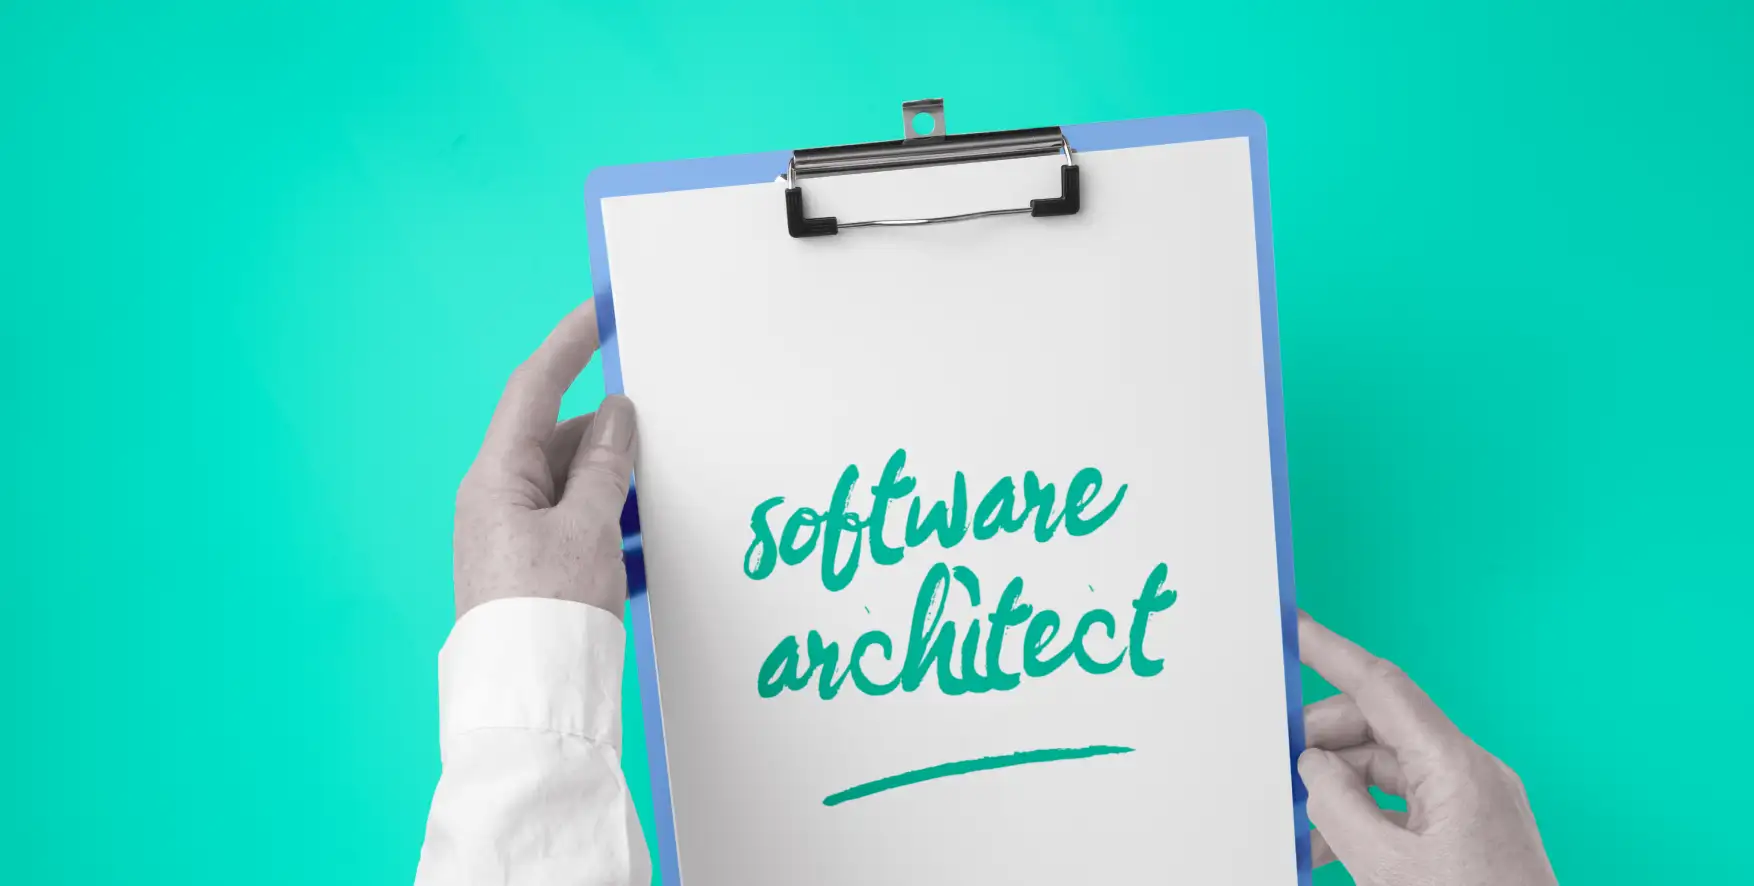 software architect written on a piece of paper in a clipboard